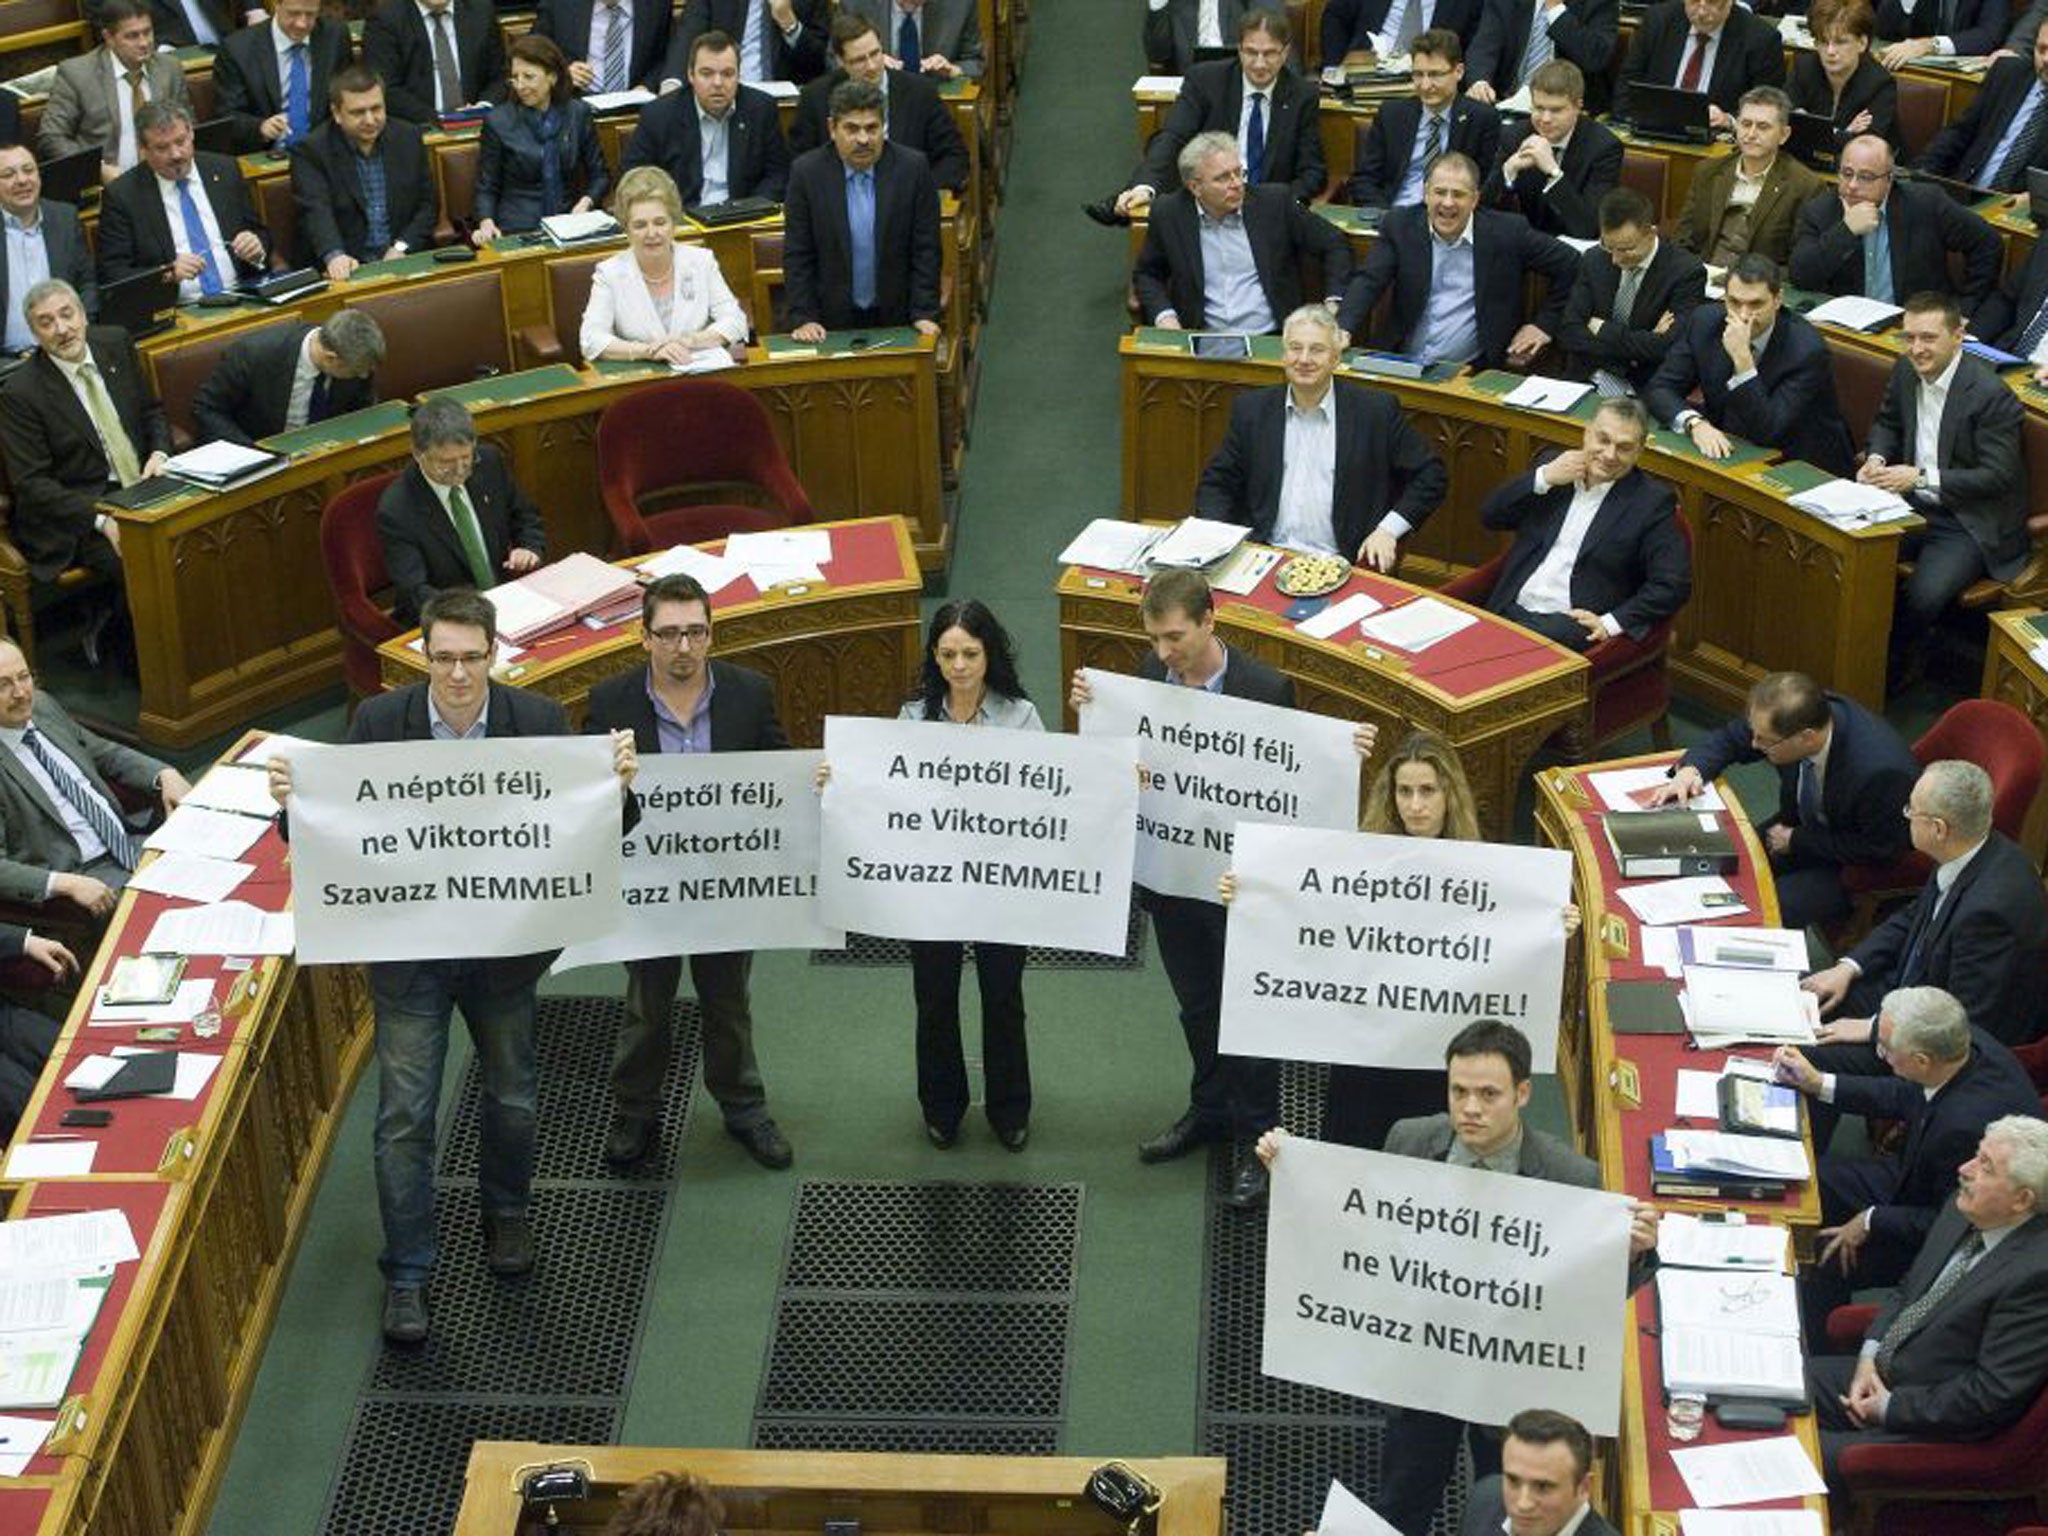 Members of the Parbeszed Magyarorszagert (Dialogue for Hungary) opposition party hold banners written: 'Fear the people, but do not fear Viktor! Vote NO!' prior to the voting of the modified Fourth Amendment of the Basic Law in the Parliament building in